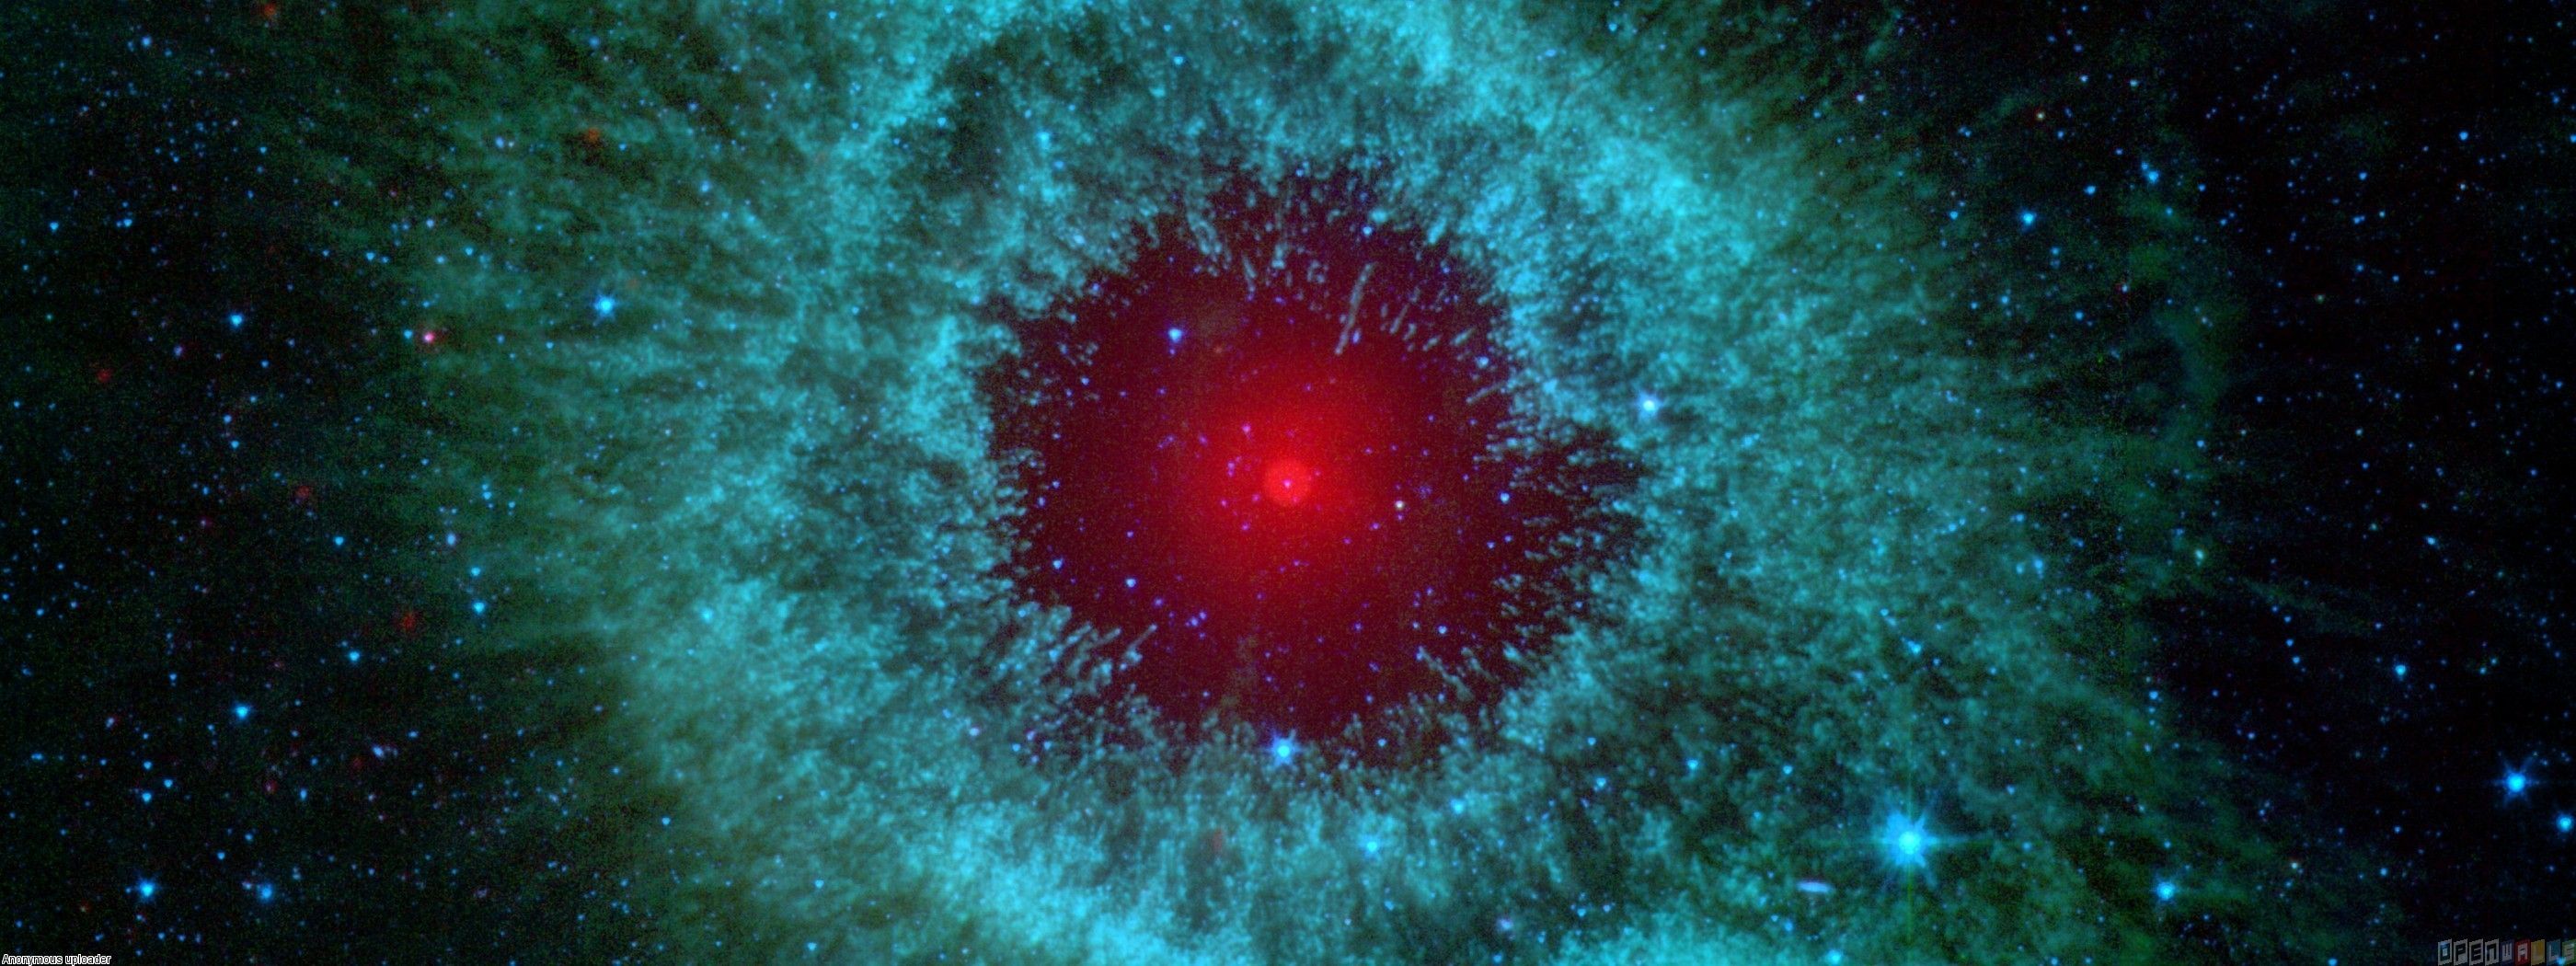 Infrared image of the helix nebula wallpaper #3204 - Open Walls